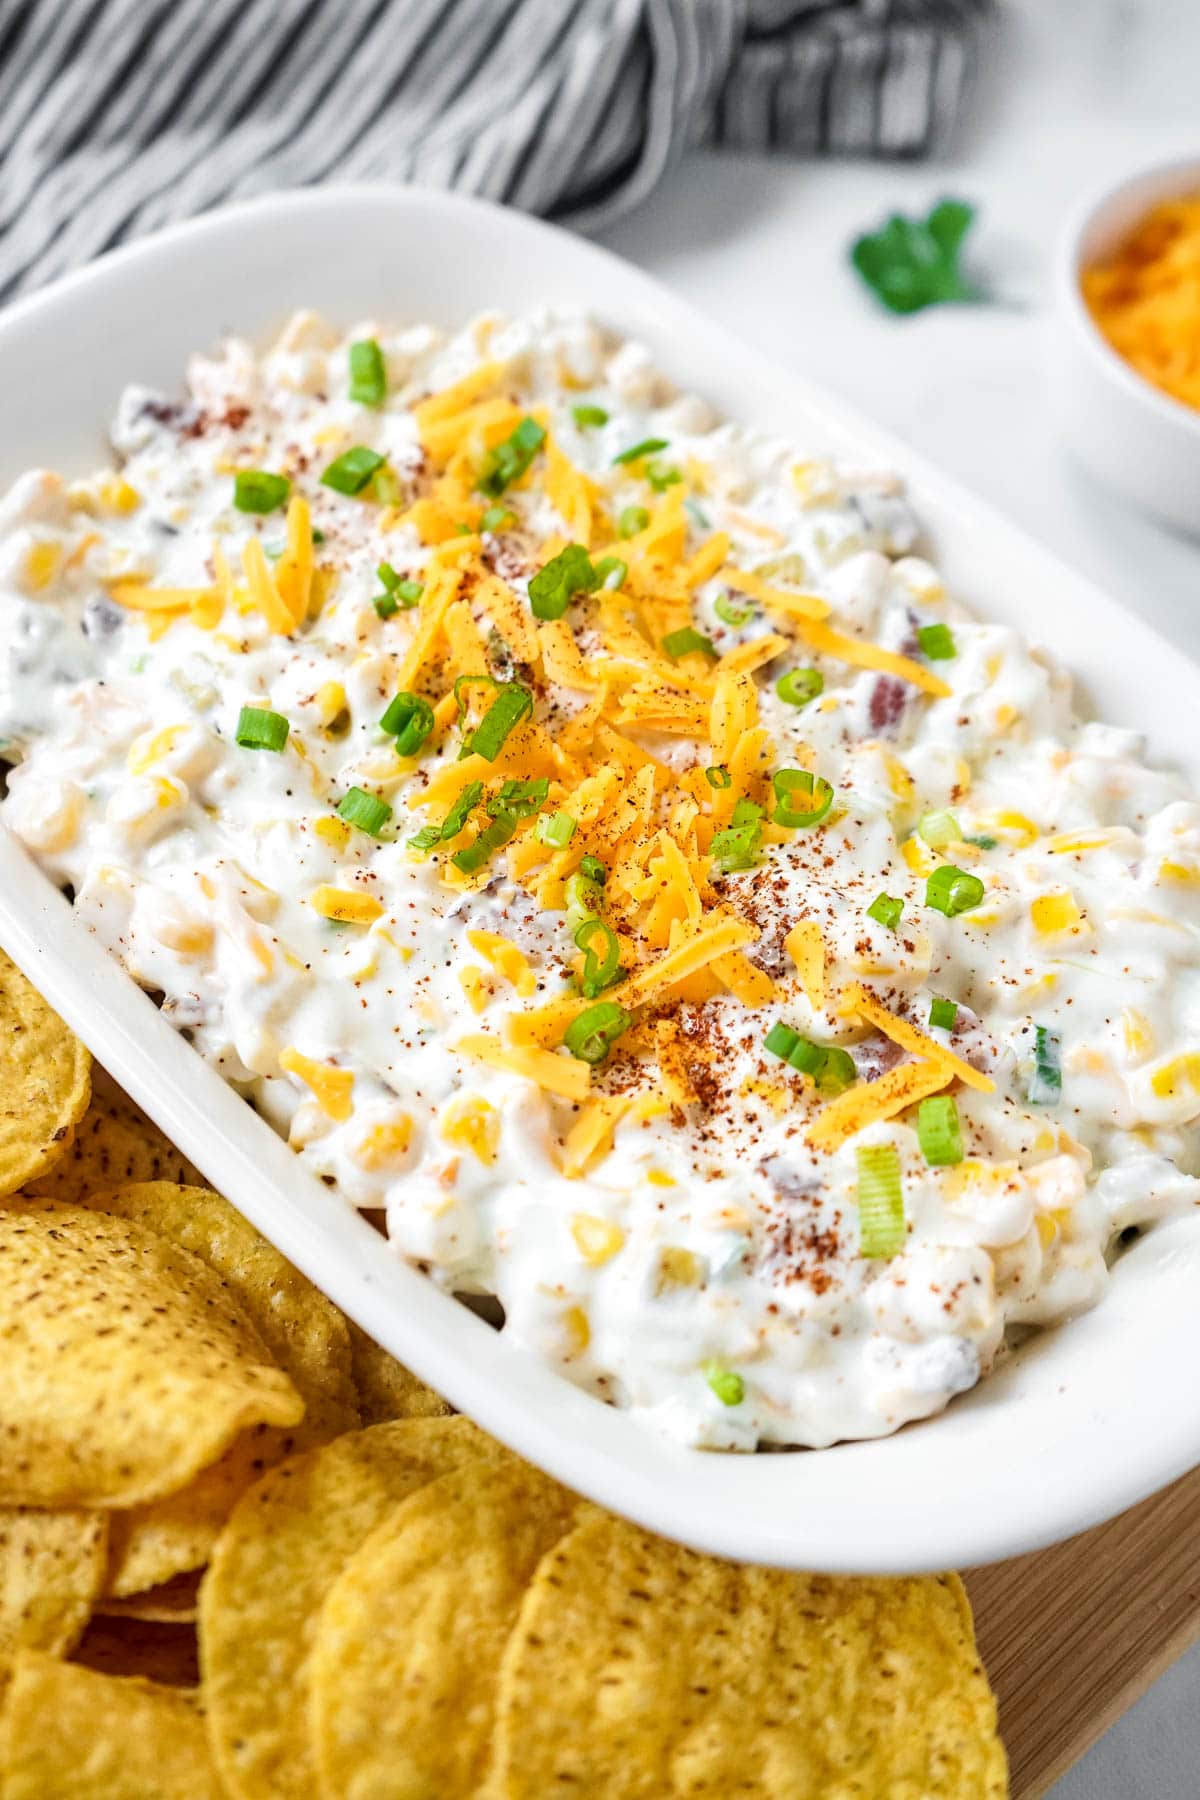 Bacon and corn crack dip in a serving dish sprinkled with chili powder, served with tortilla chips.